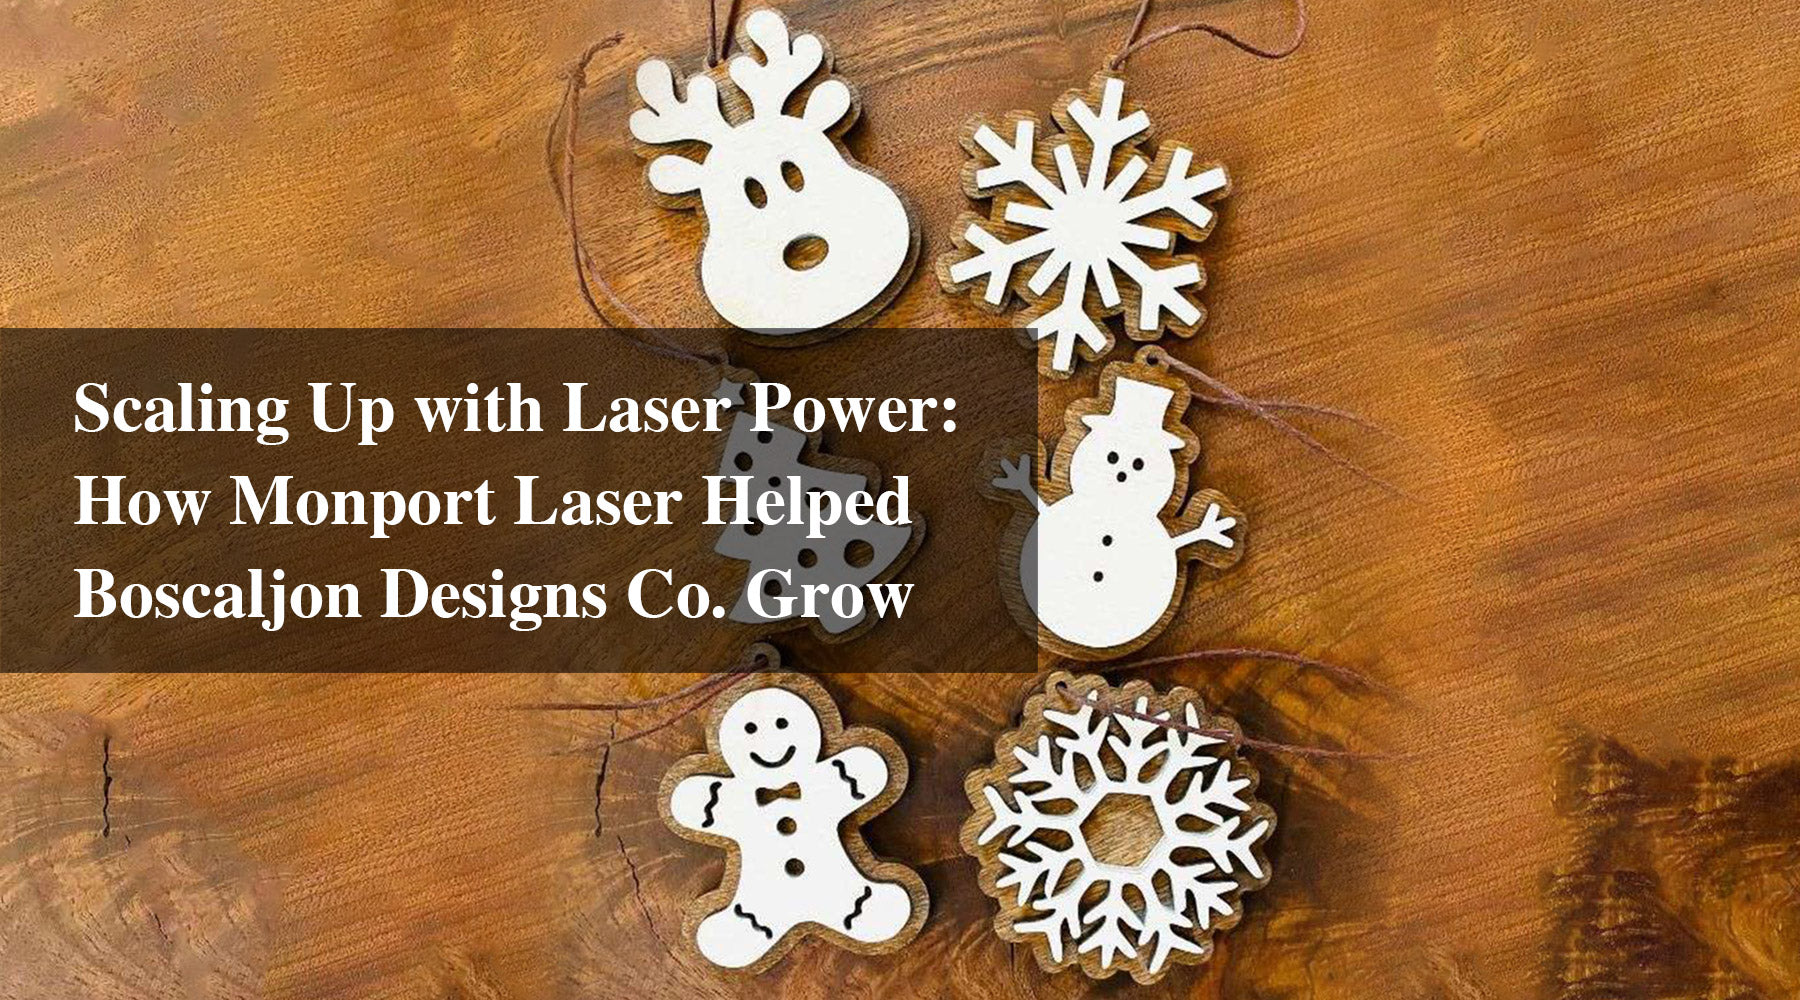 Scaling Up with Laser Power: How Monport Laser Helped Boscaljon Designs Co. Grow